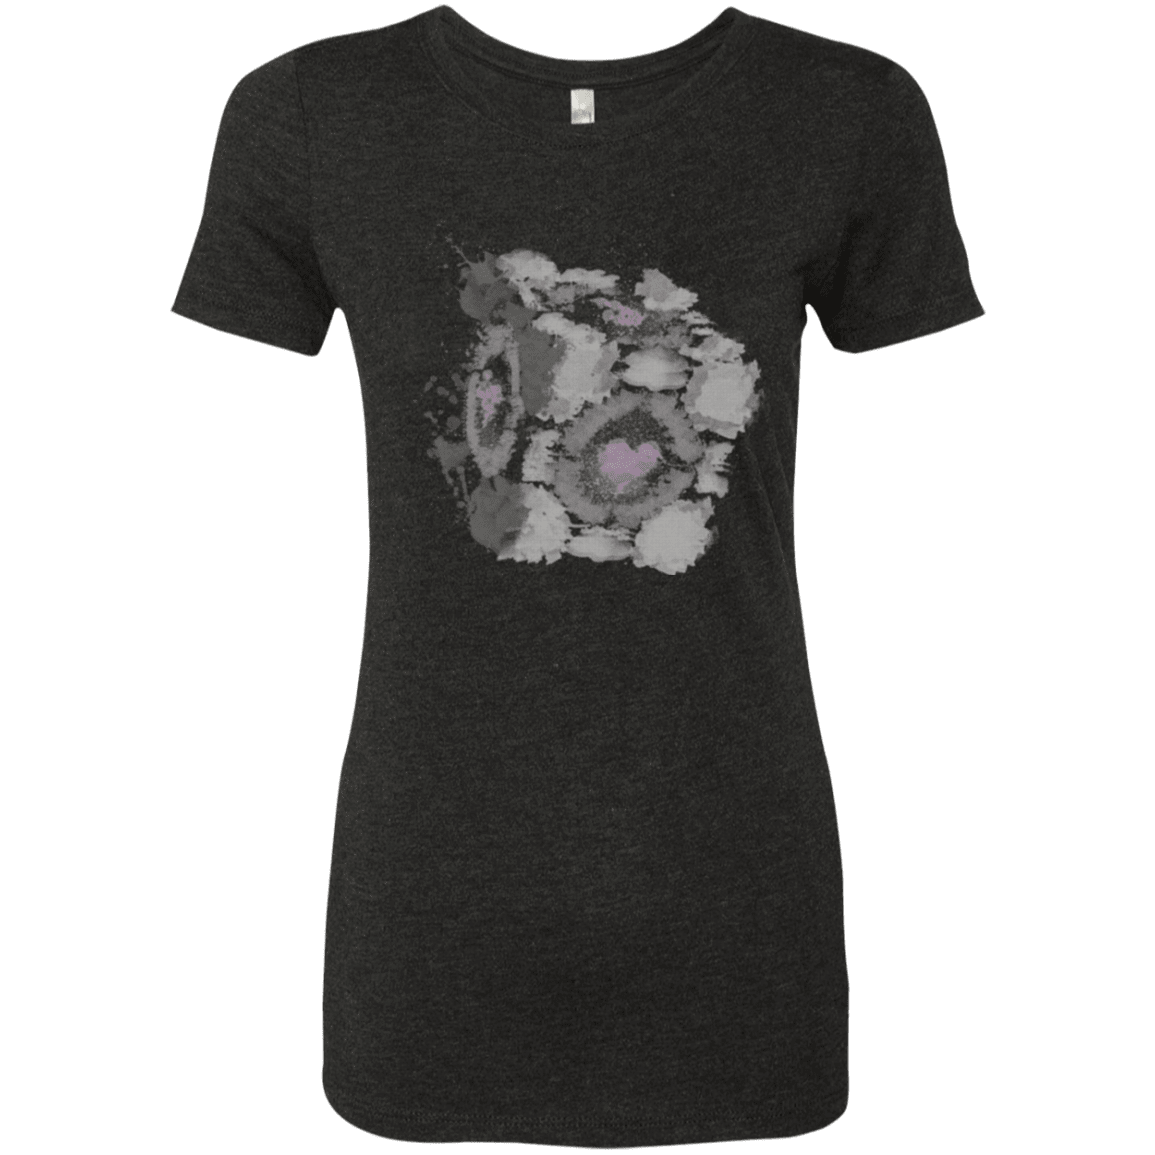 T-Shirts Vintage Black / Small Abstract Cube Women's Triblend T-Shirt